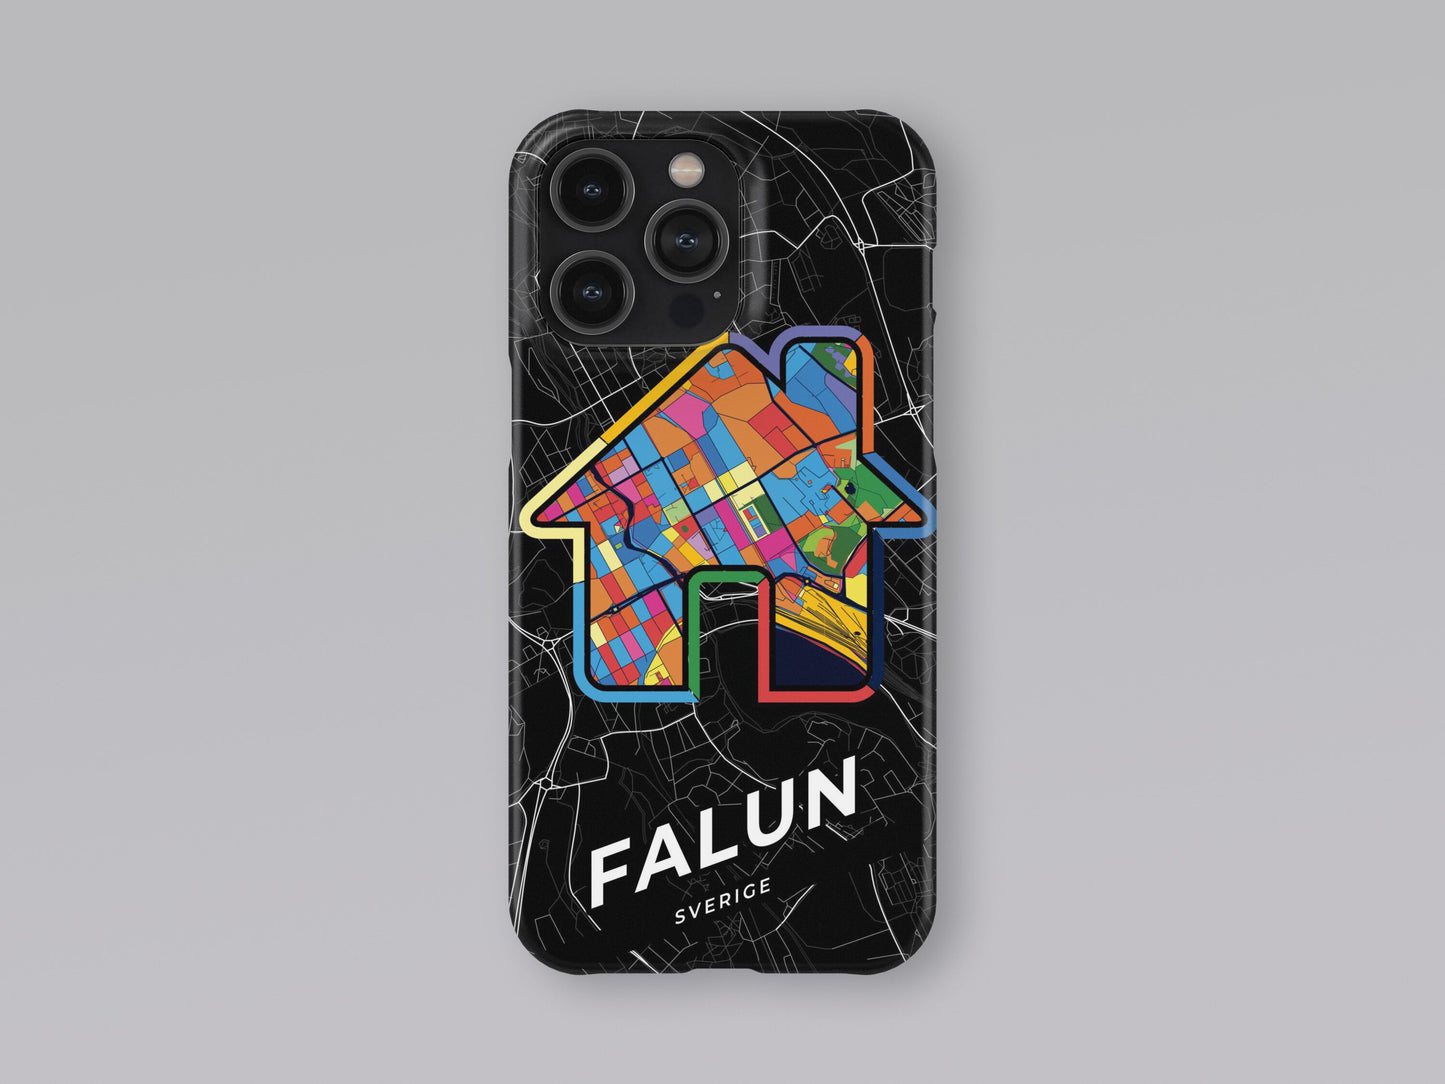 Falun Sweden slim phone case with colorful icon. Birthday, wedding or housewarming gift. Couple match cases. 3